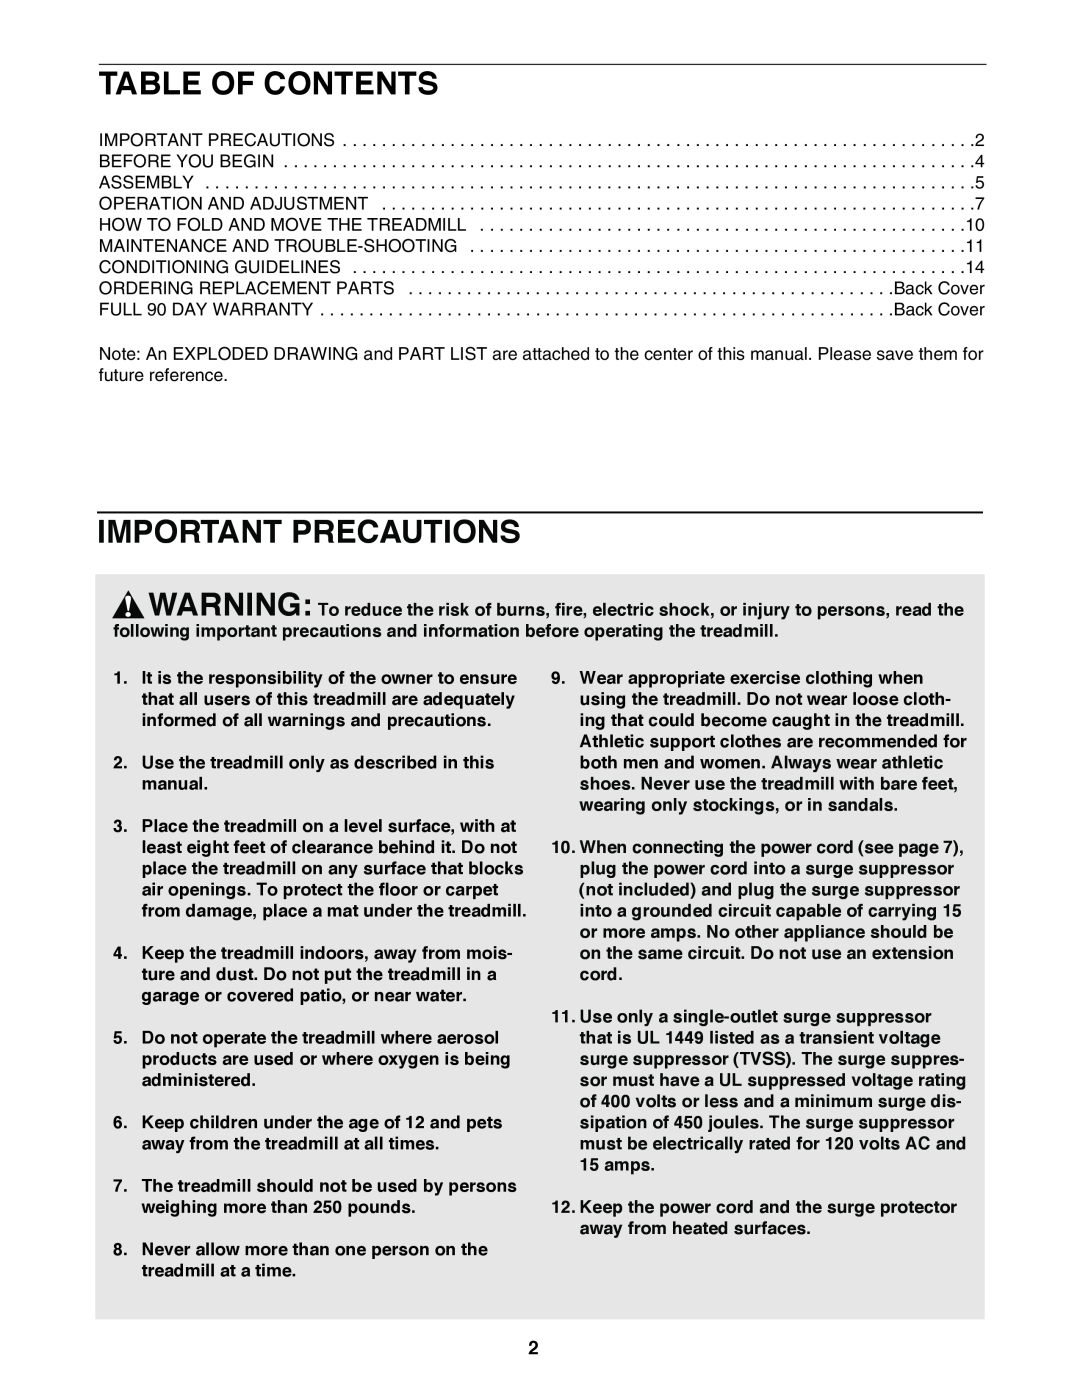 ProForm 831.297390 user manual Table Of Contents, Important Precautions, Use the treadmill only as described in this manual 